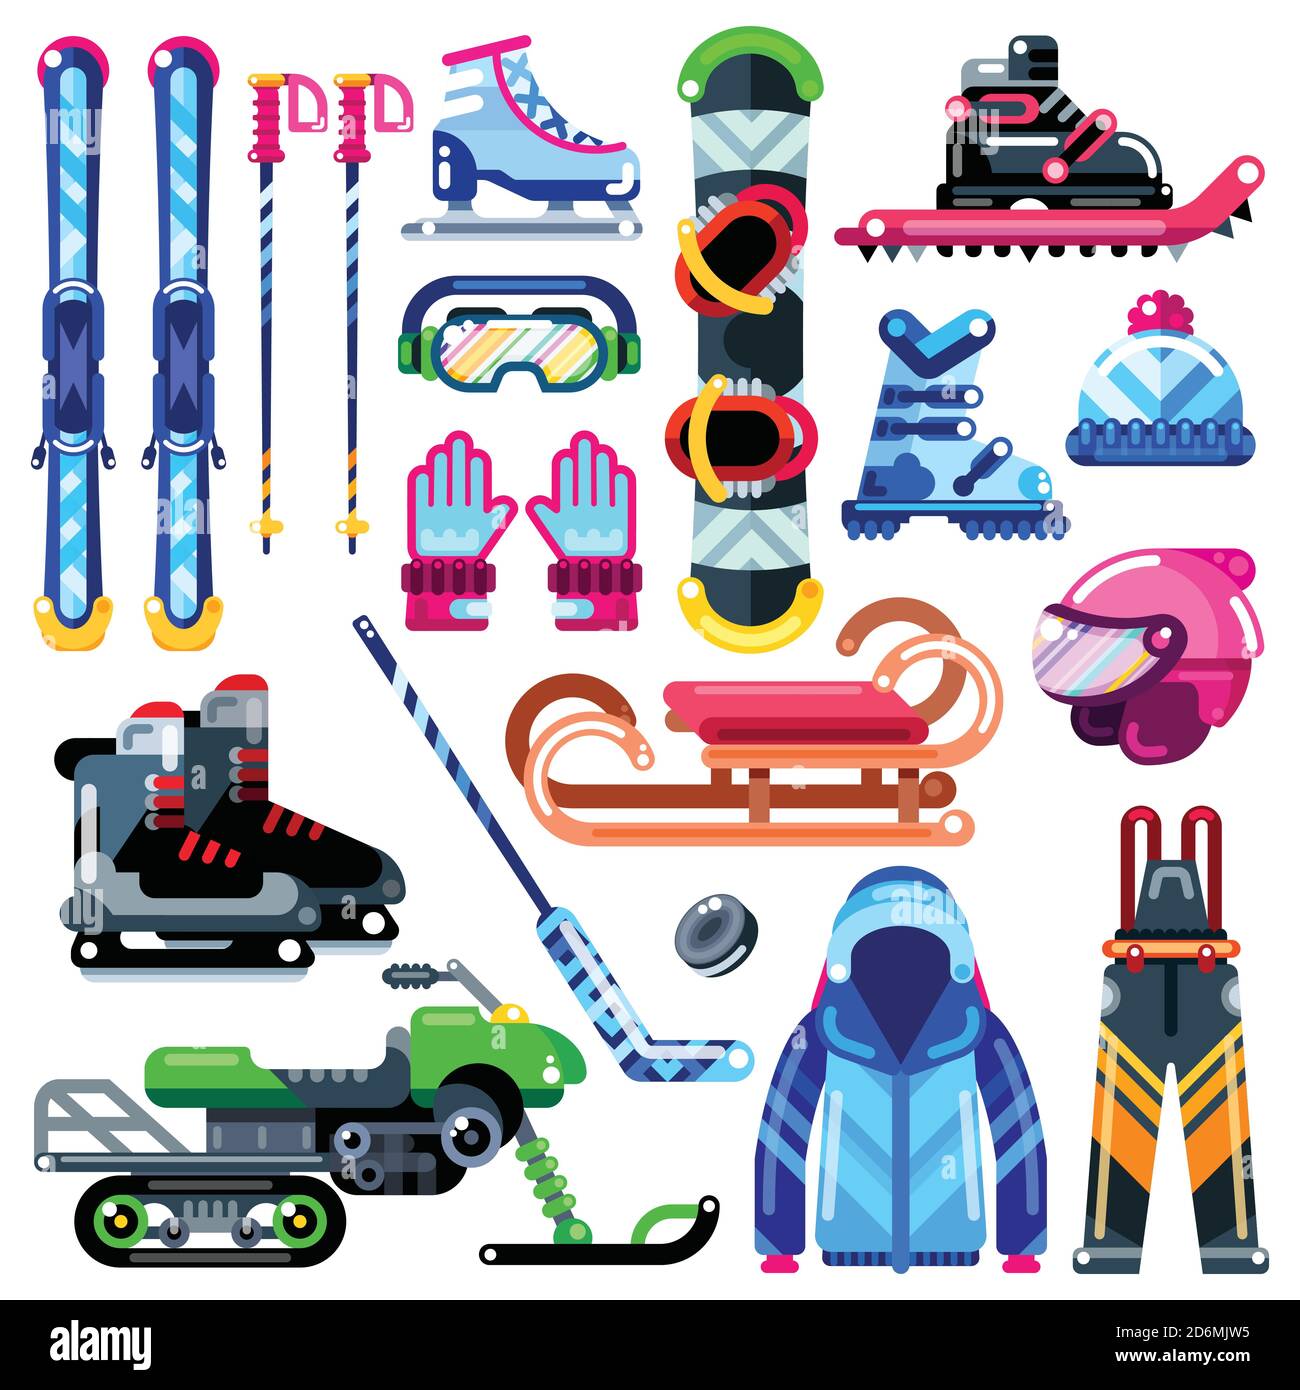 Winter sports equipment, clothes and accessories. Icons and isolated design elements set. Outdoor leisure activity stuff. Vector illustration. Stock Vector